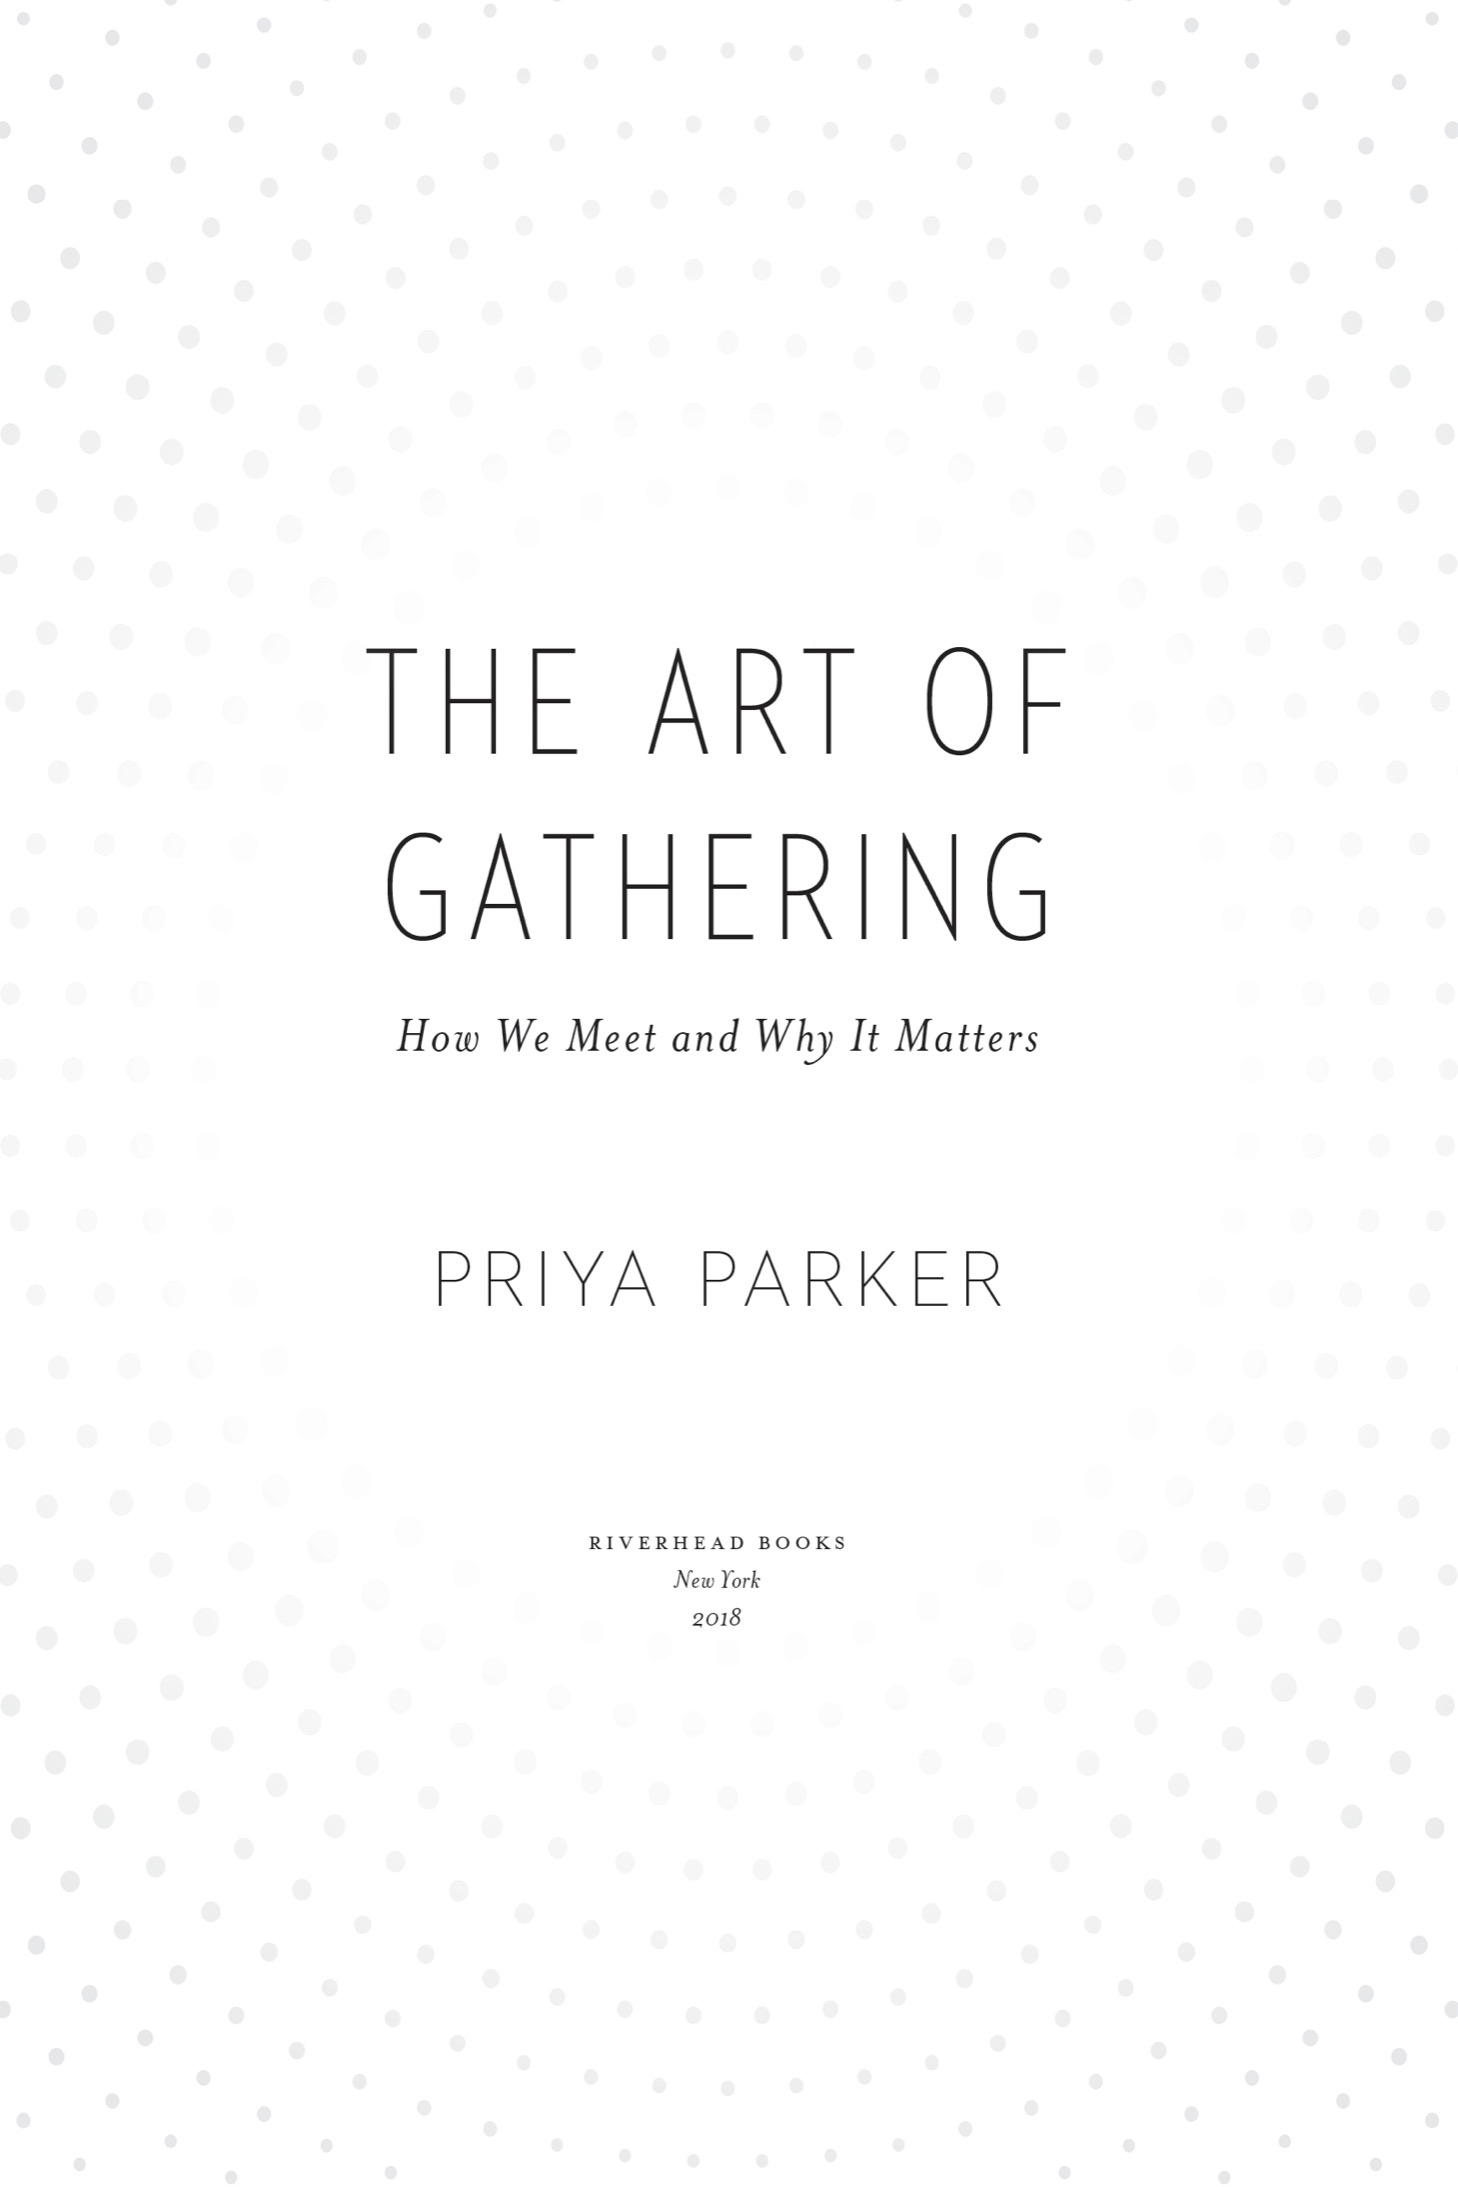 Book title, The Art of Gathering, Subtitle, How We Meet and Why It Matters, author, Priya Parker, imprint, Riverhead Books